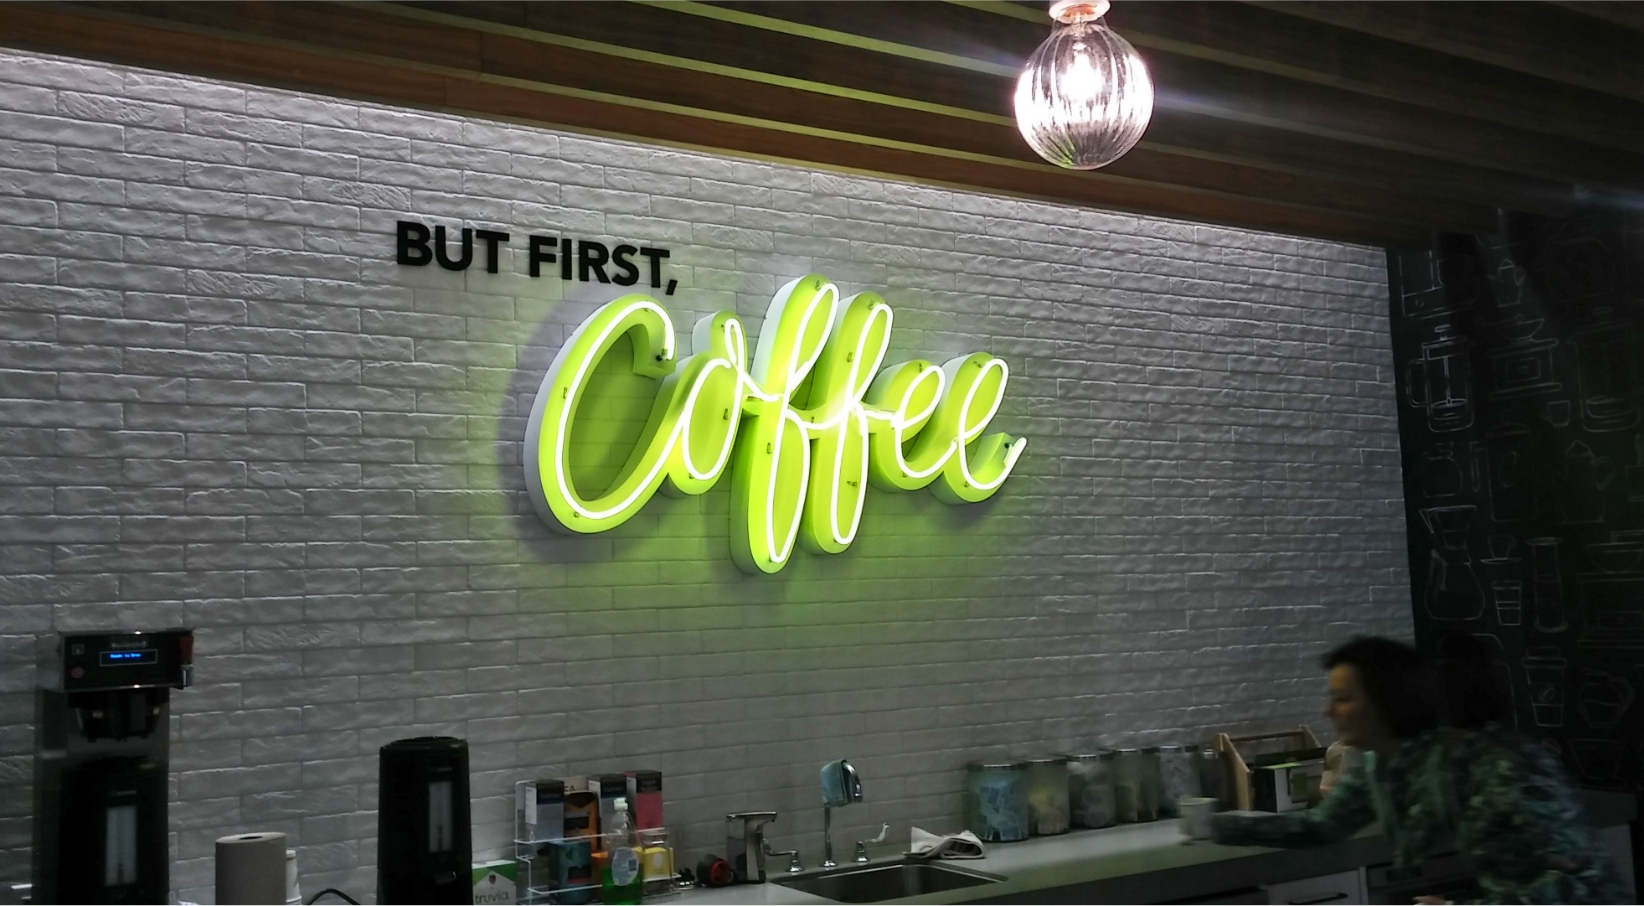 But first, Coffee logo sign on brick wall